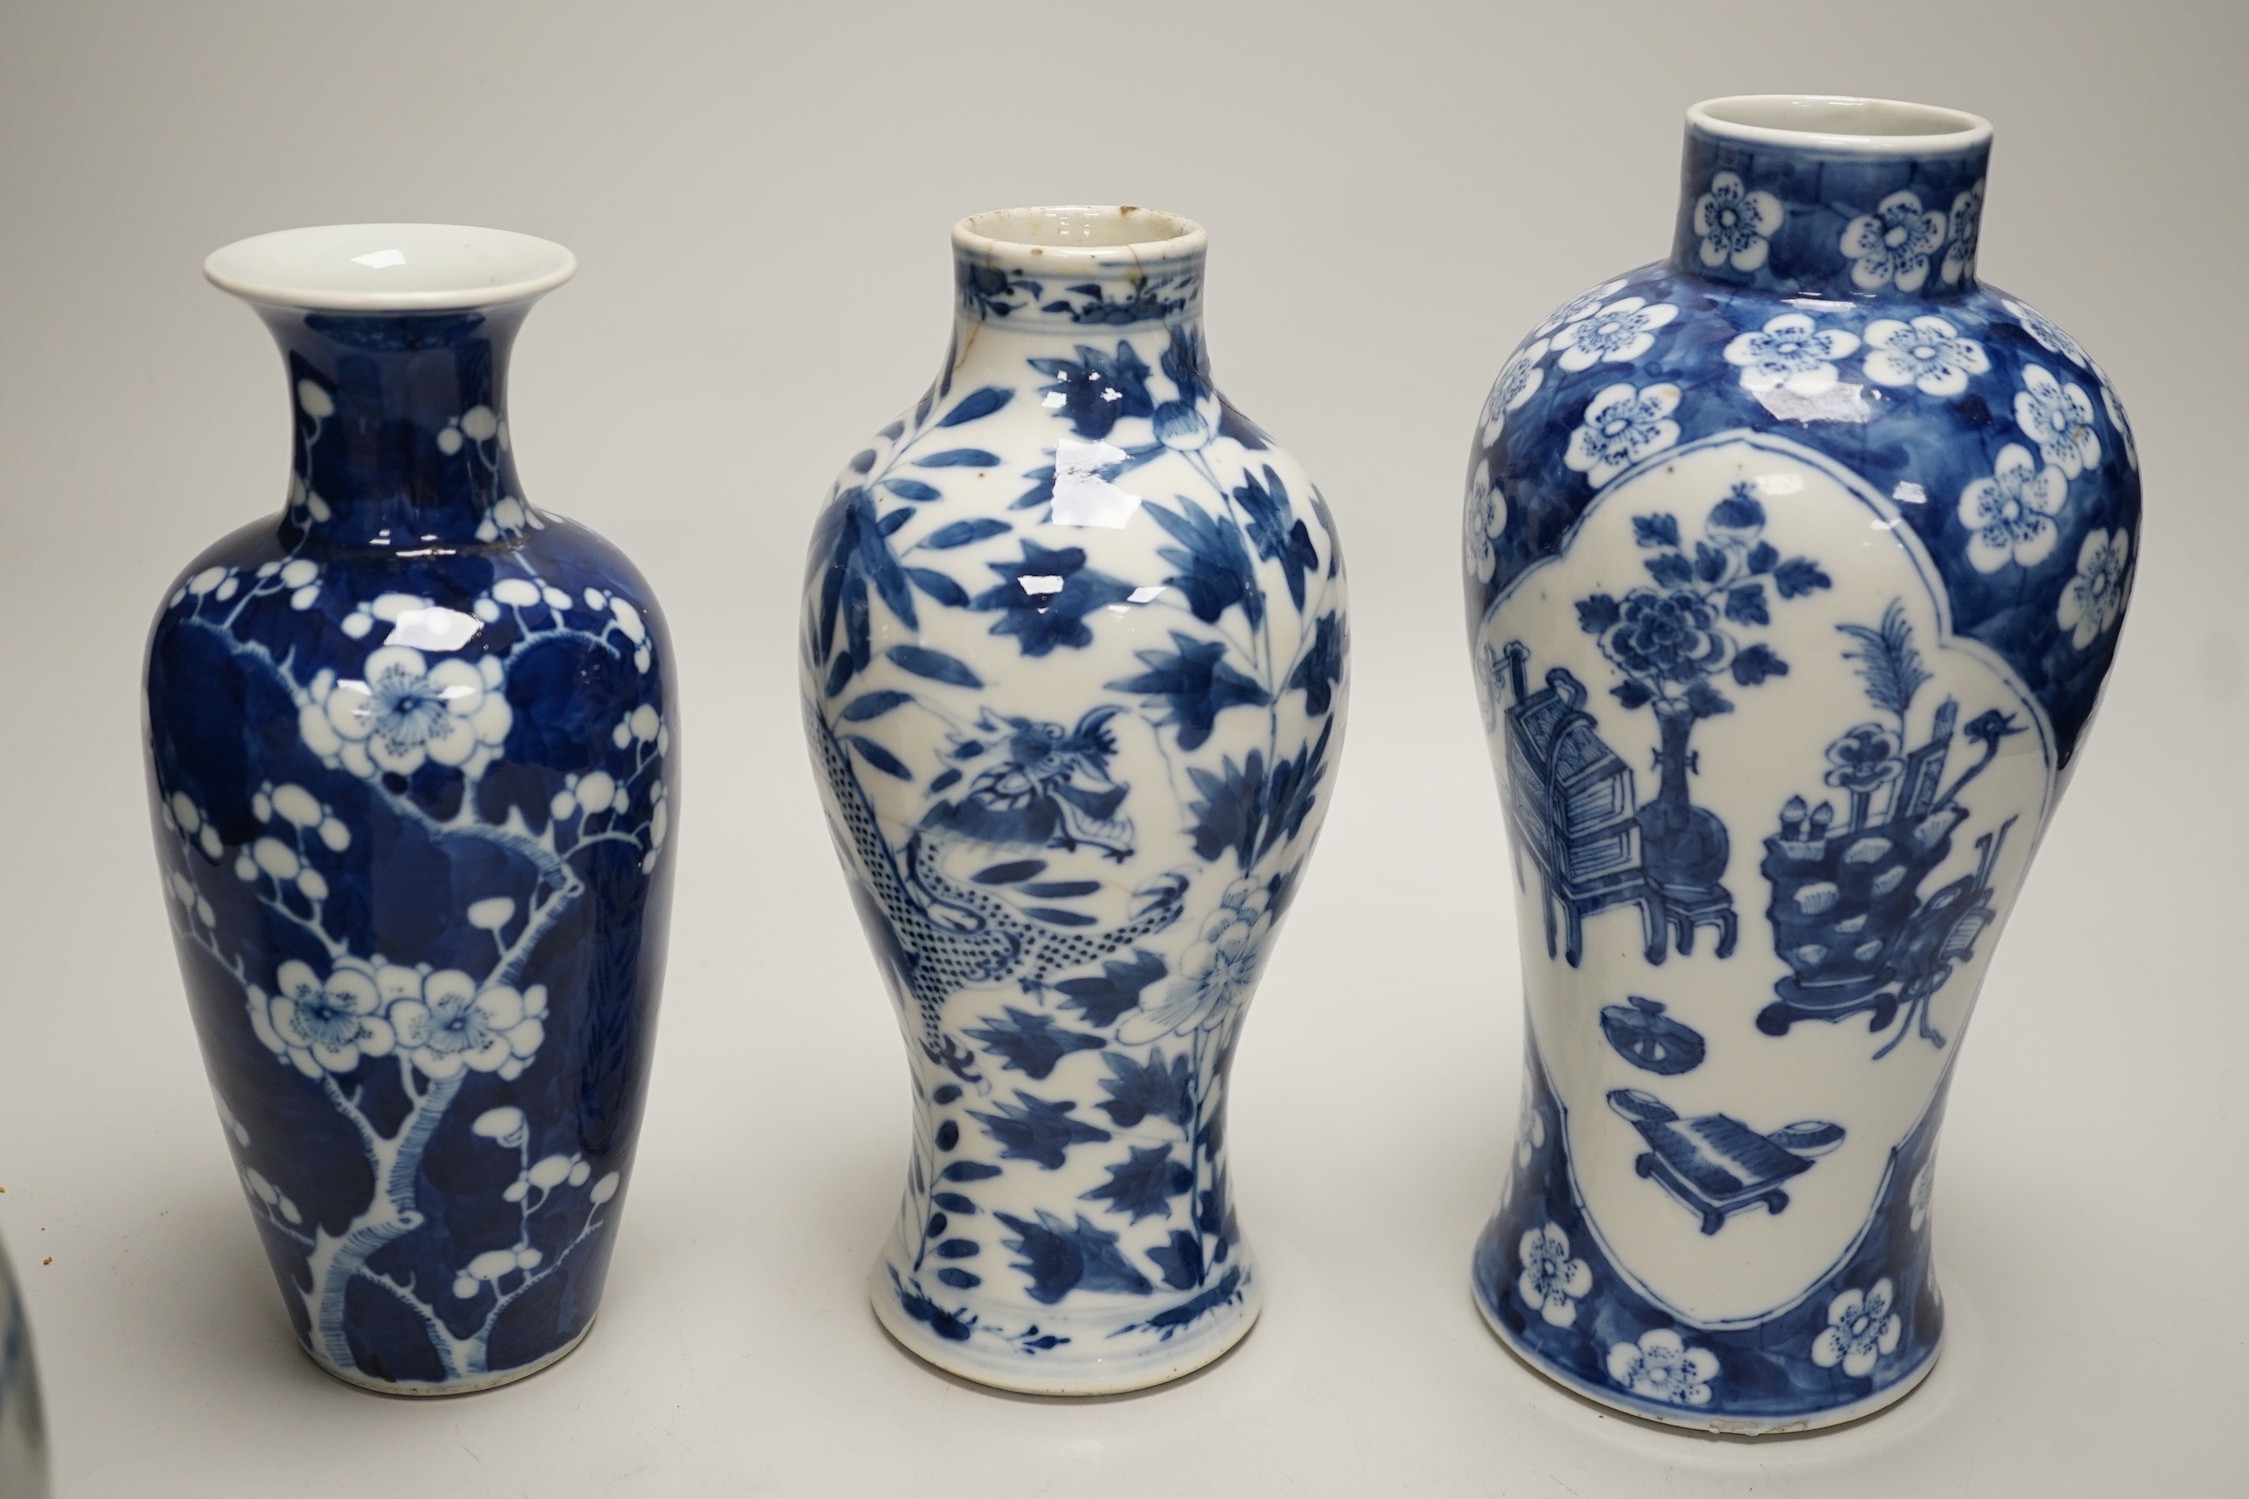 Three Chinese blue and white vases and a similar jar, 19th century, tallest 22.5 cm